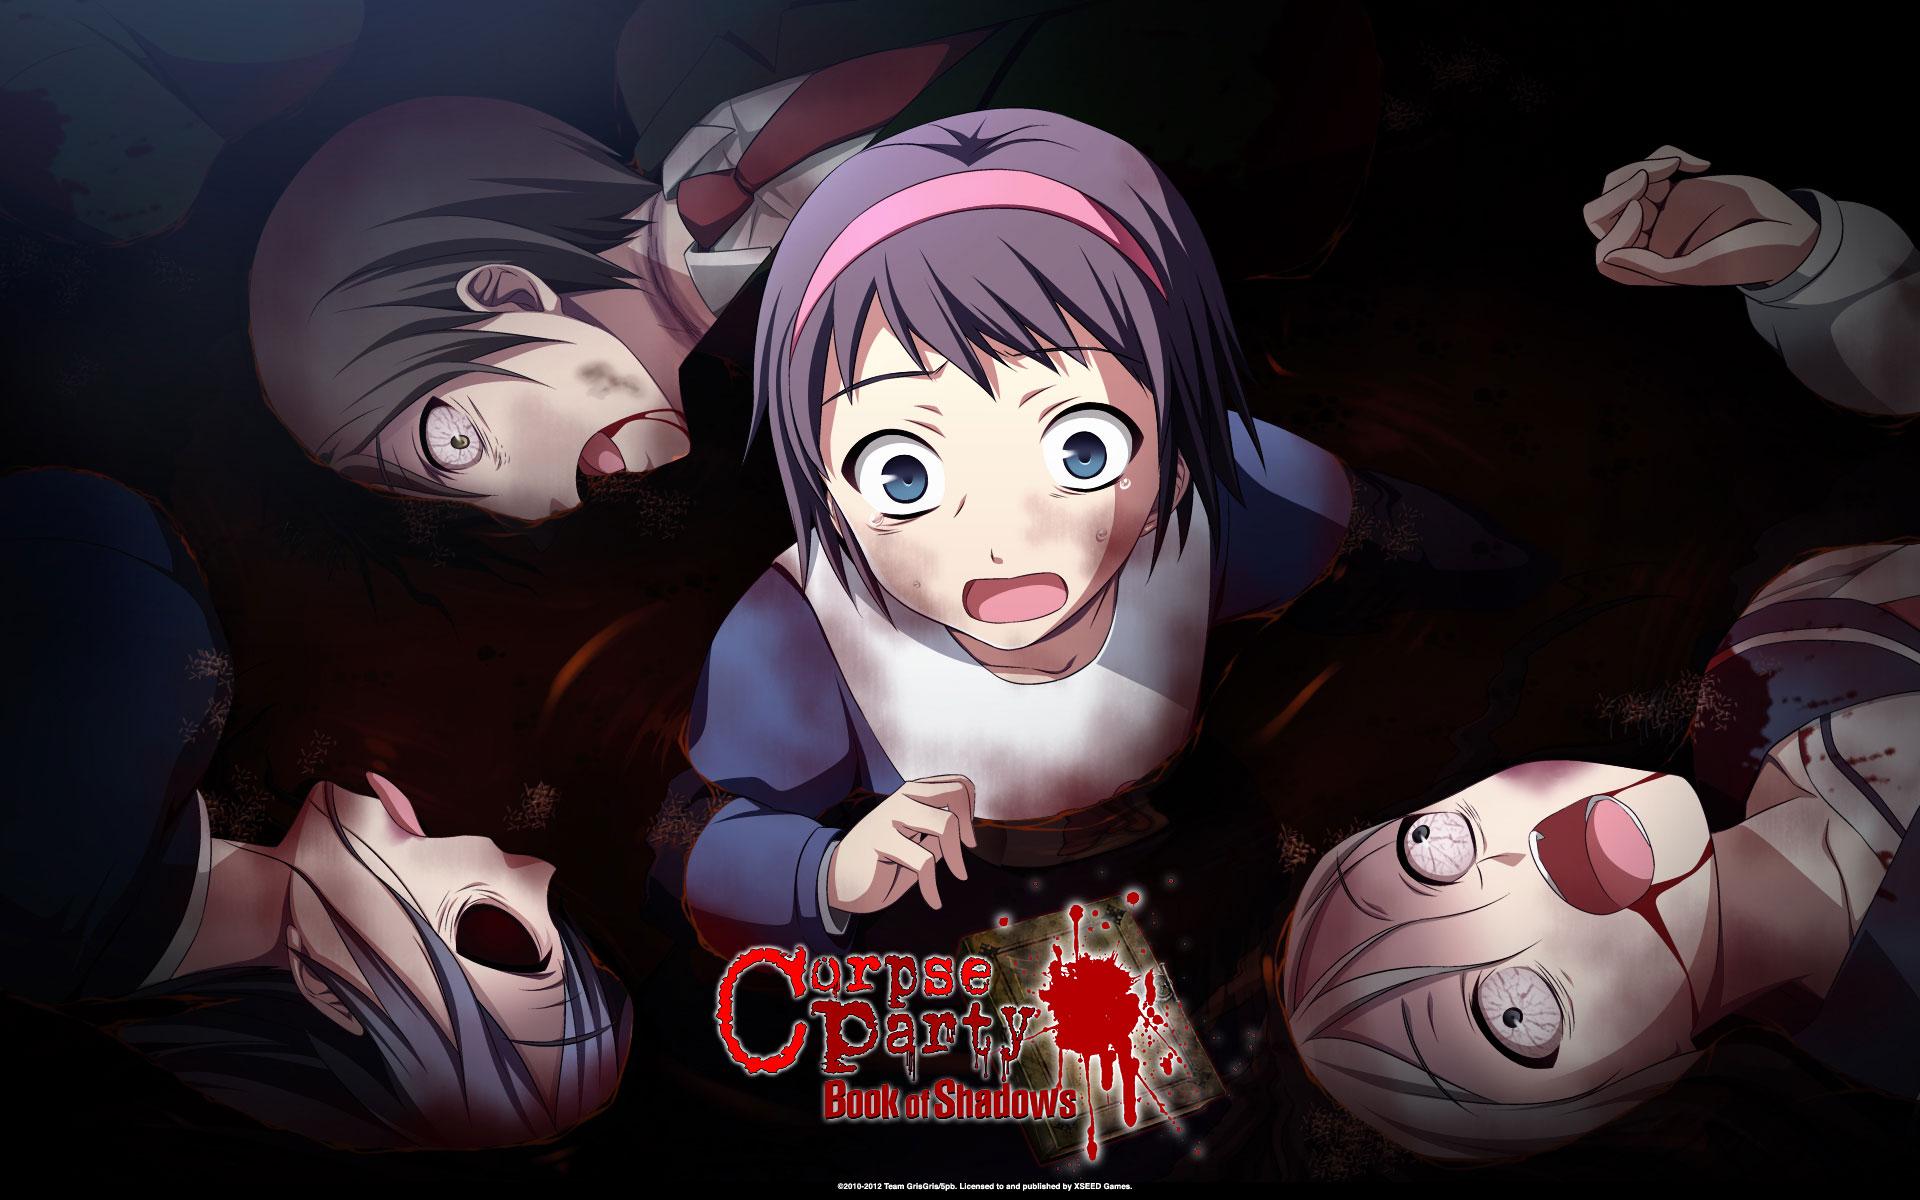 Corpse Party of Shadows HD Wallpaper. Background Image